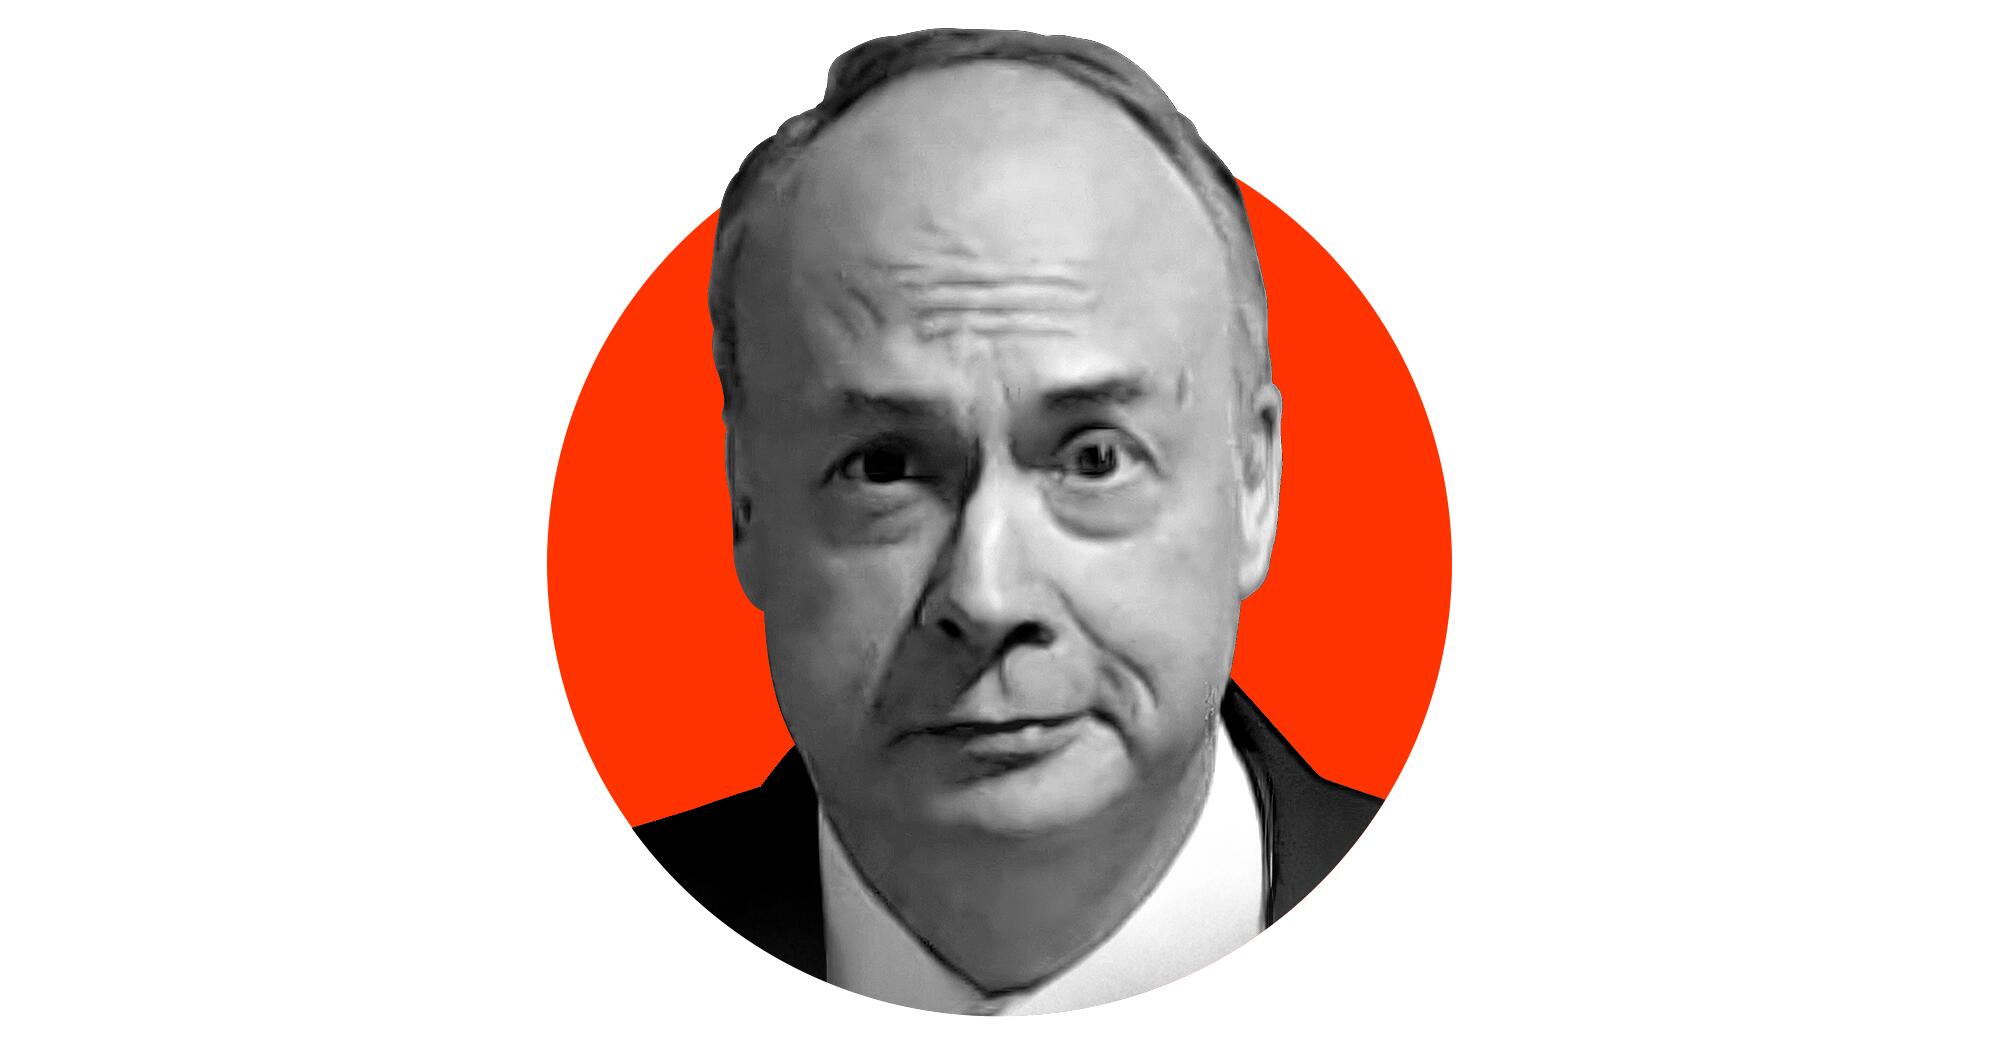 A photo illustration of a black-and-white police mugshot of ex-assistant Atty. Gen. Jeffrey Clark emerging from a red circle